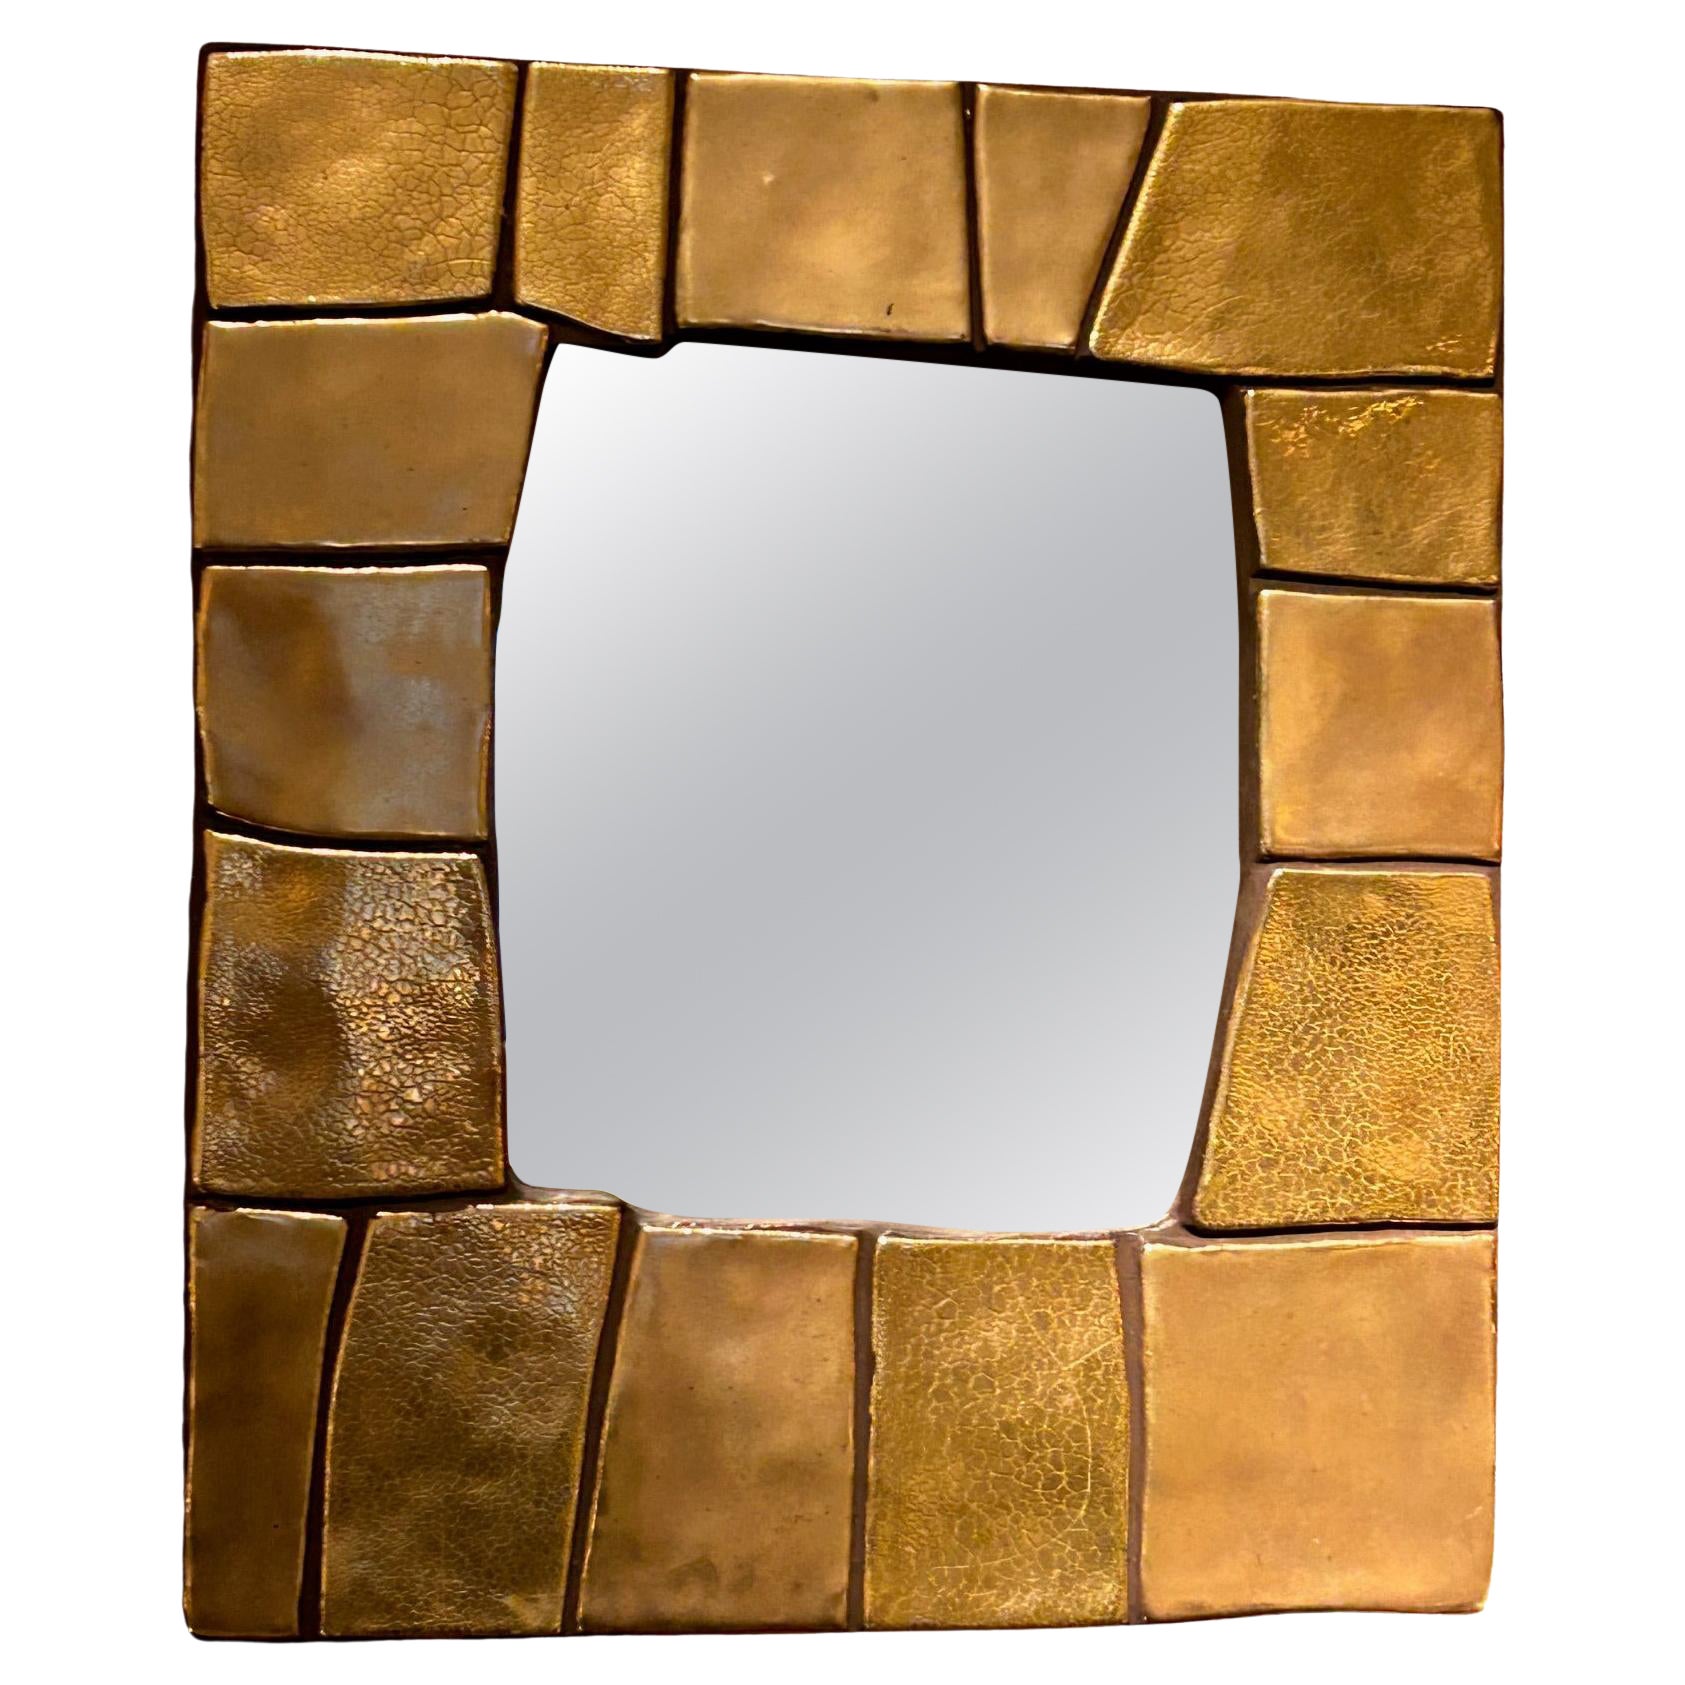 Earthenware mirror by Mithé Espelt, model "Cuzco" created in 1974 For Sale